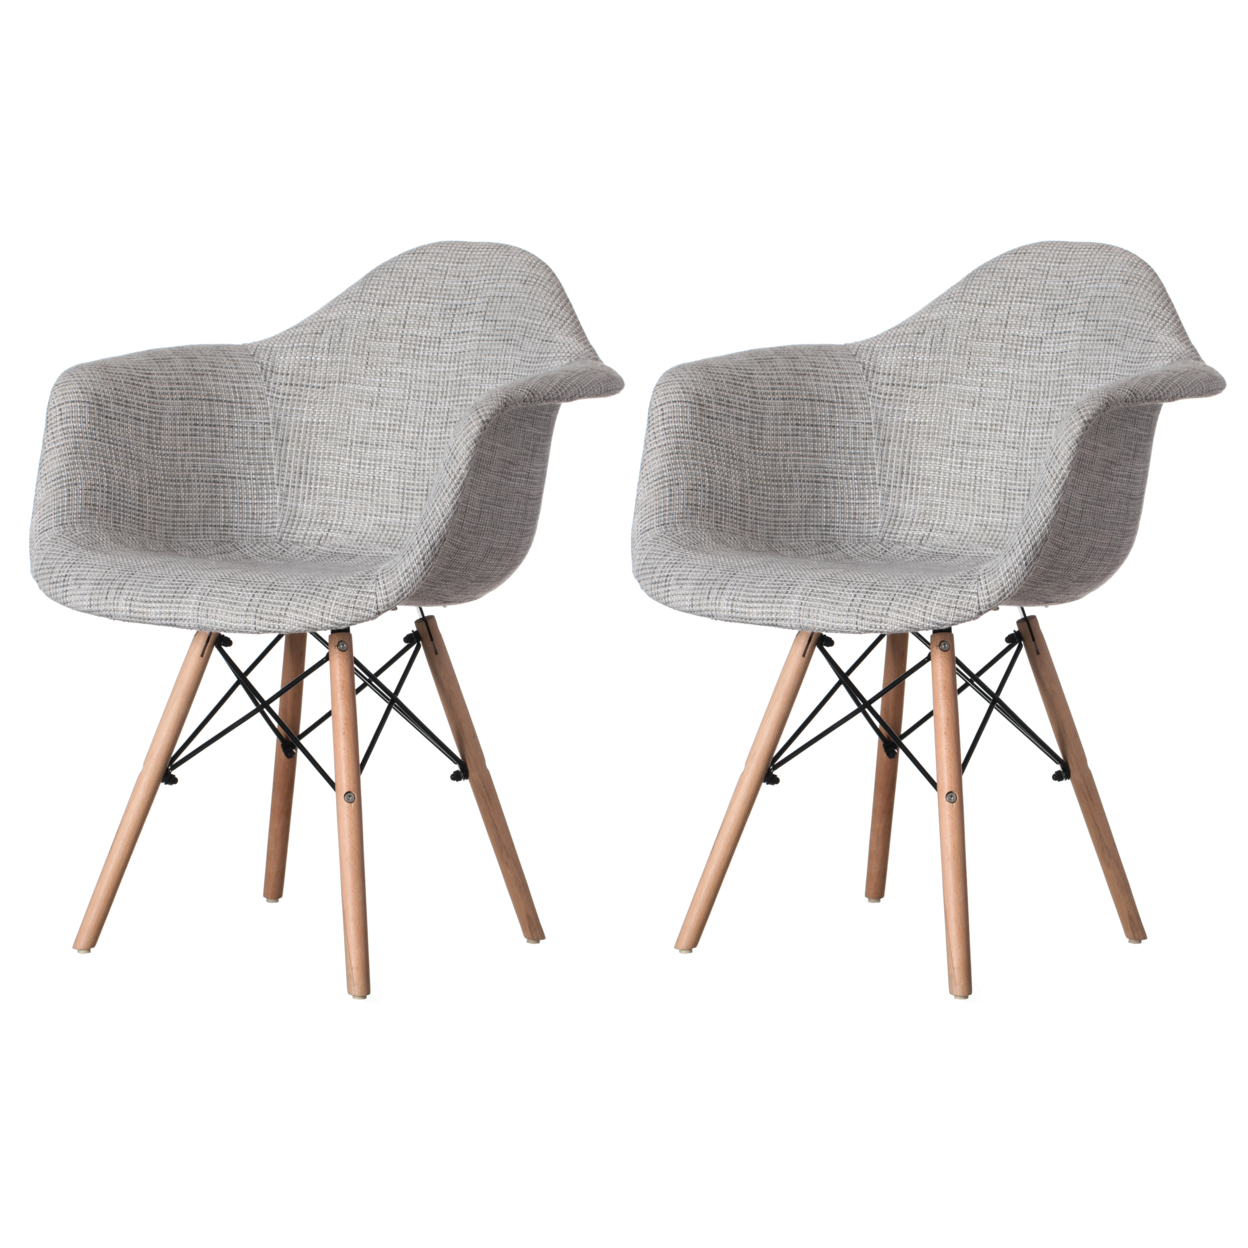 Mid-Century Modern Style Fabric Lined Armchair with Beech Wooden Legs - Grey Set of 2